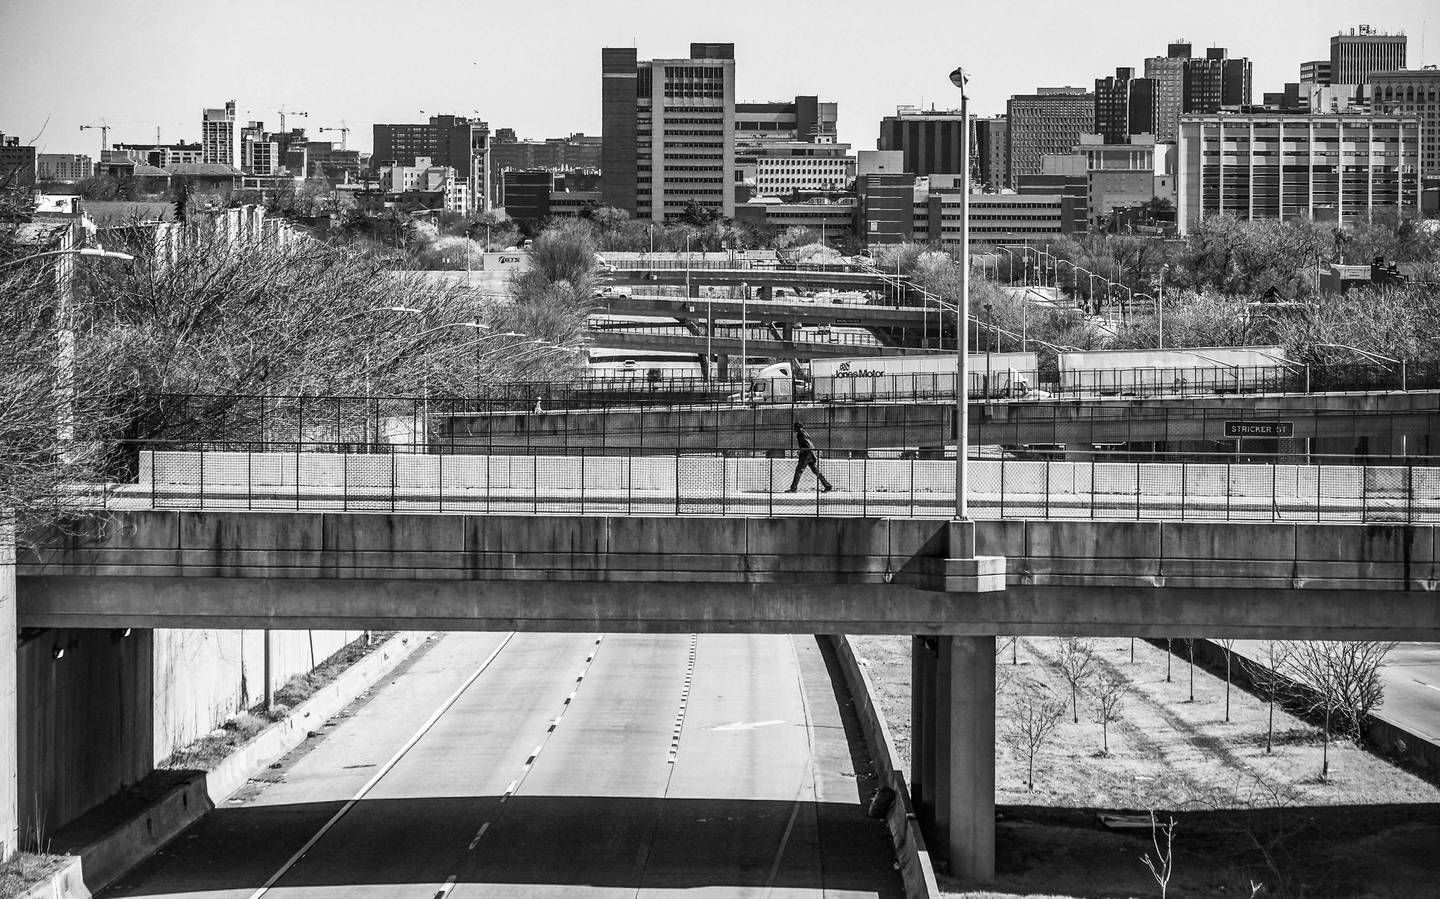 A pedestrian pass over a bridge above U.S. Route 40 in Baltimore, Wednesday, March 8, 2023.